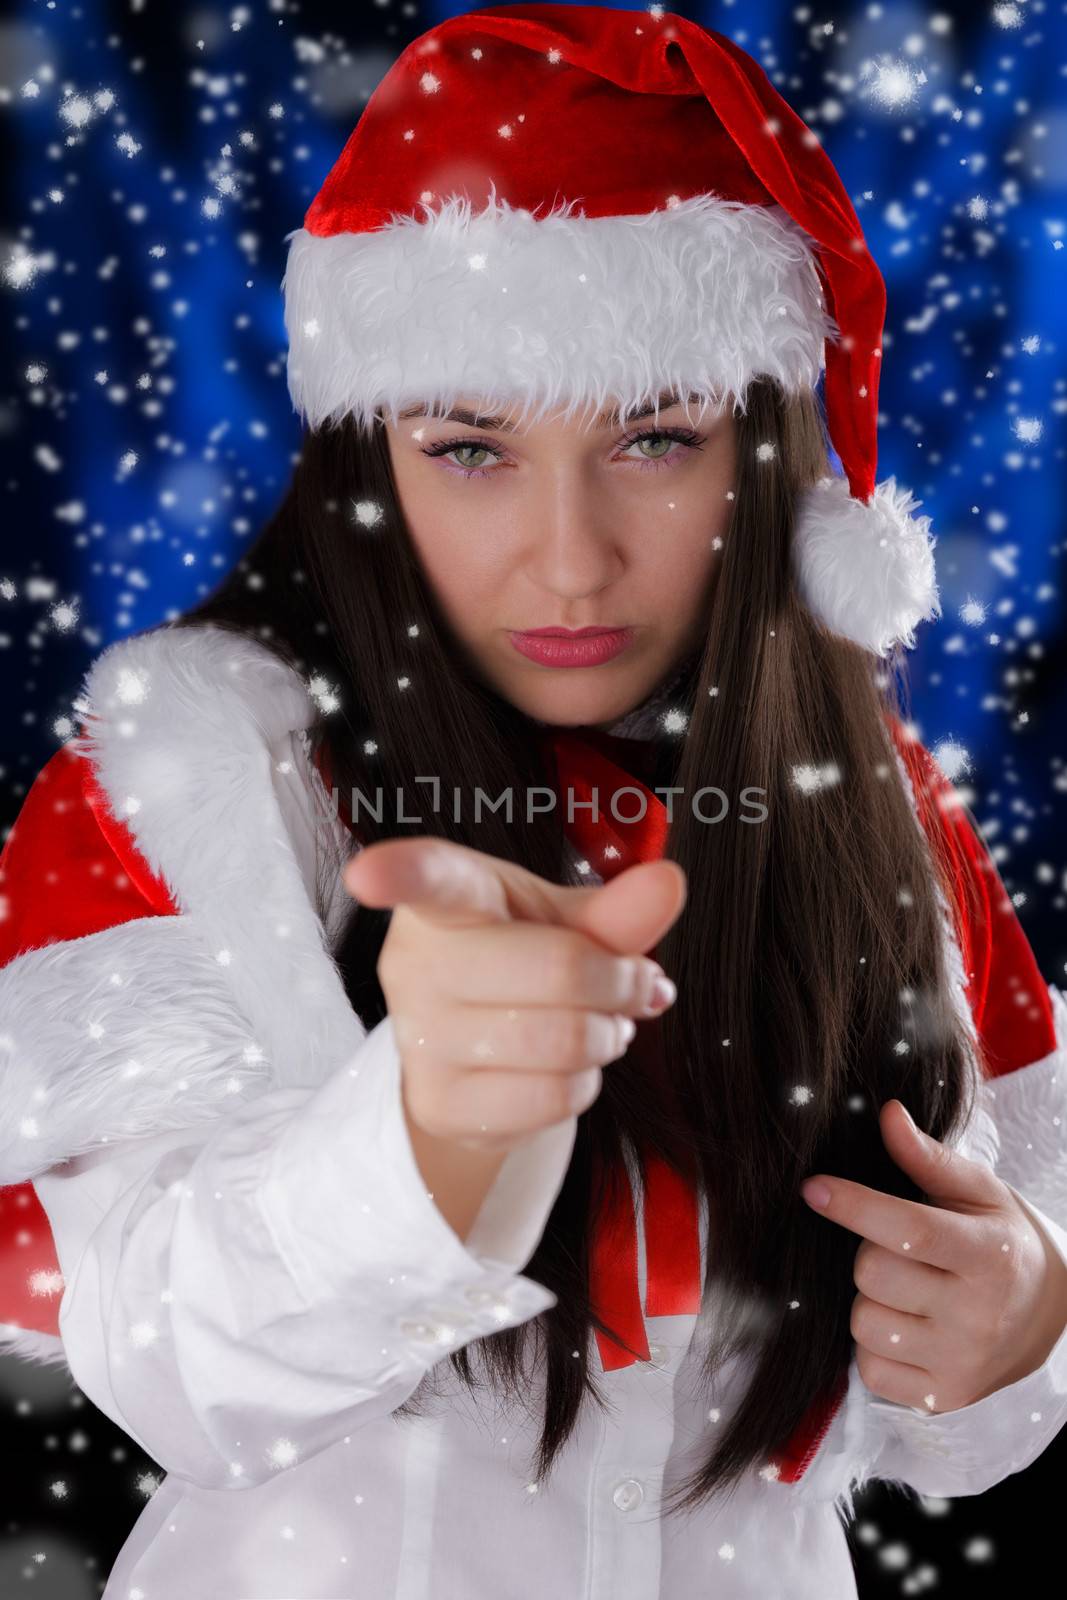 Beautiful girl pointing at the viewer with snow falling around her.